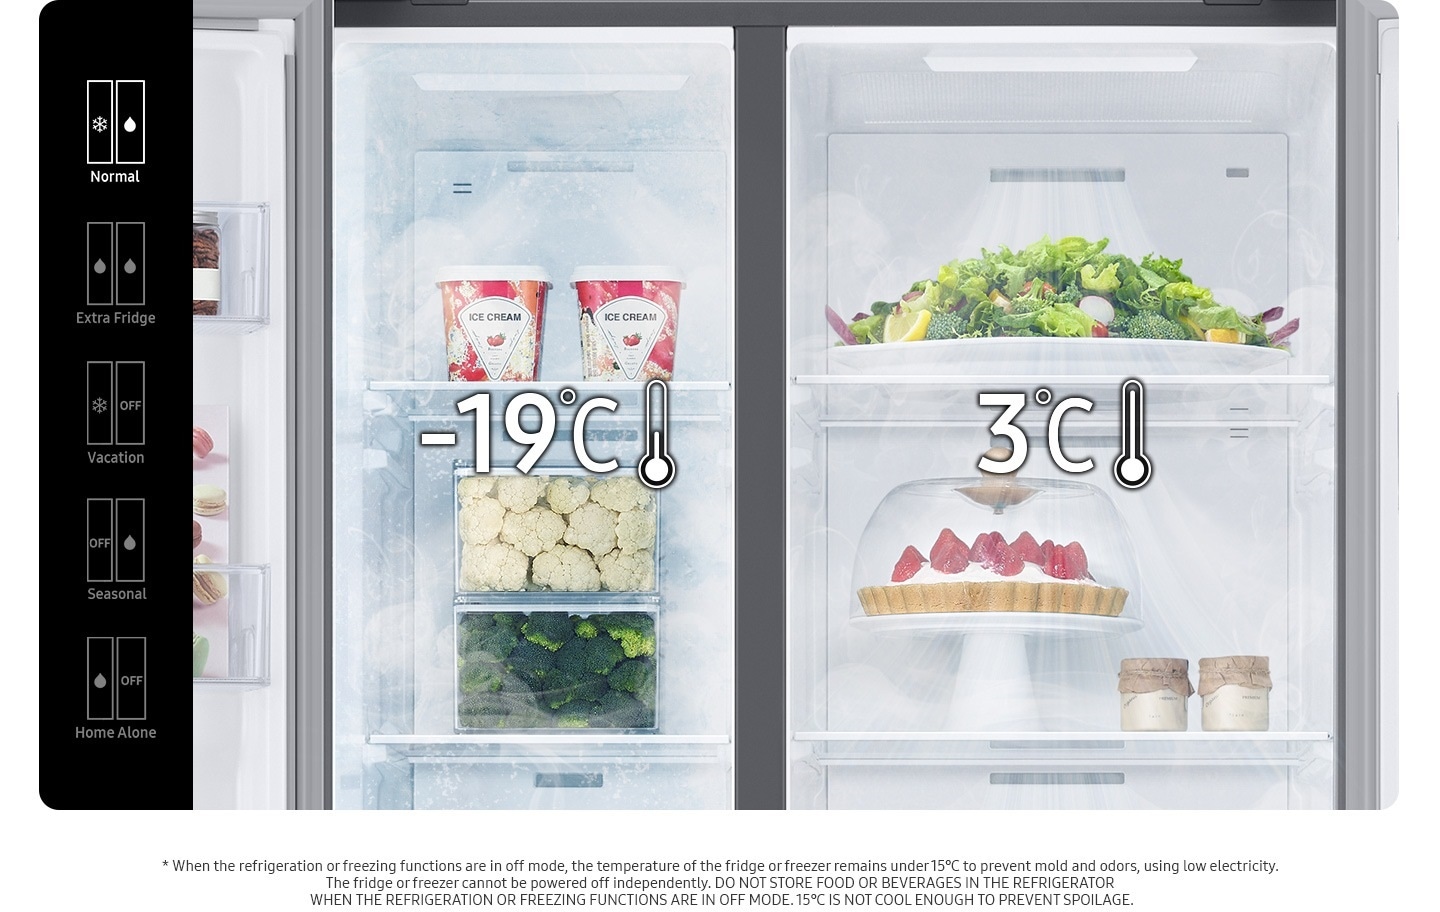 Normal(-19℃ in freezer, 3℃ in fridge), Extra Fridge(both 3℃ in freezer and fridge), Vacation(-19℃ in freezer, fridge off), Seasonal(freezer off, 3℃ in fridge), and Home Alone(3℃ in freezer, off fridge) modes are available with the buttons inside the RS8000CCH.